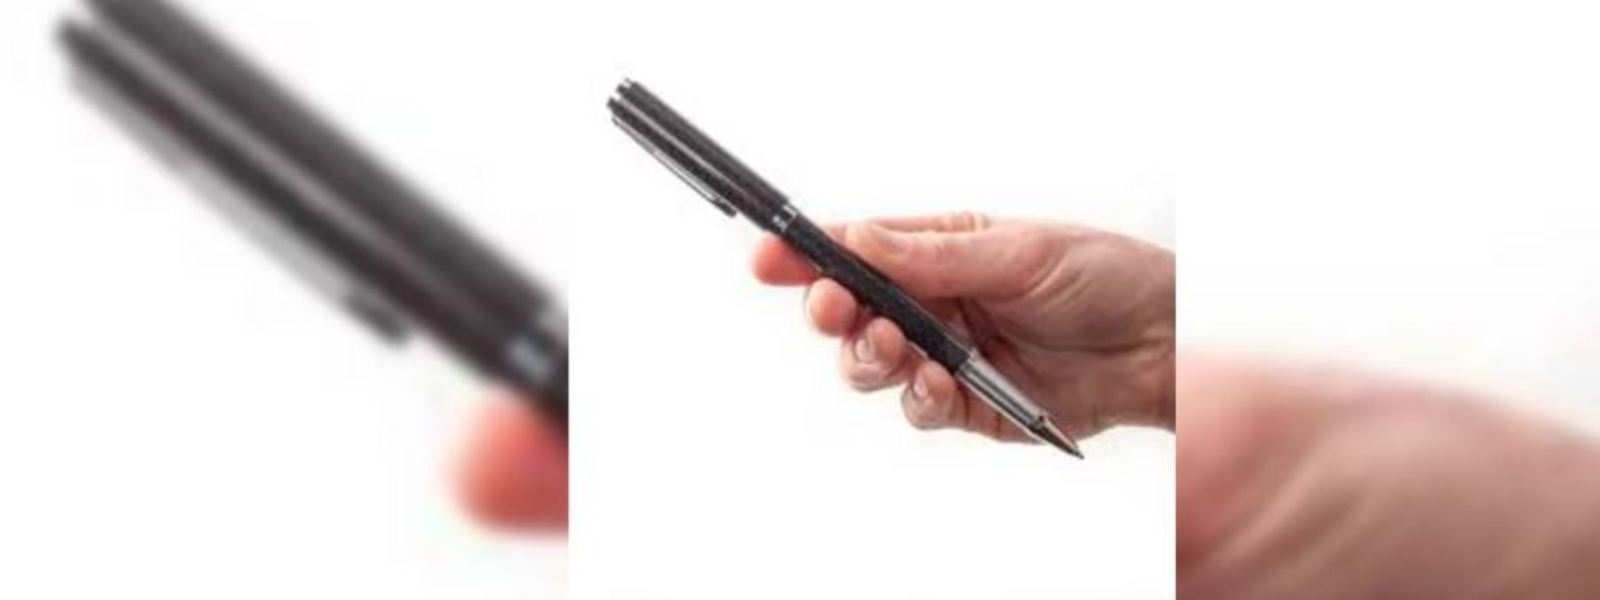 People requested to bring a pen when visiting post offices